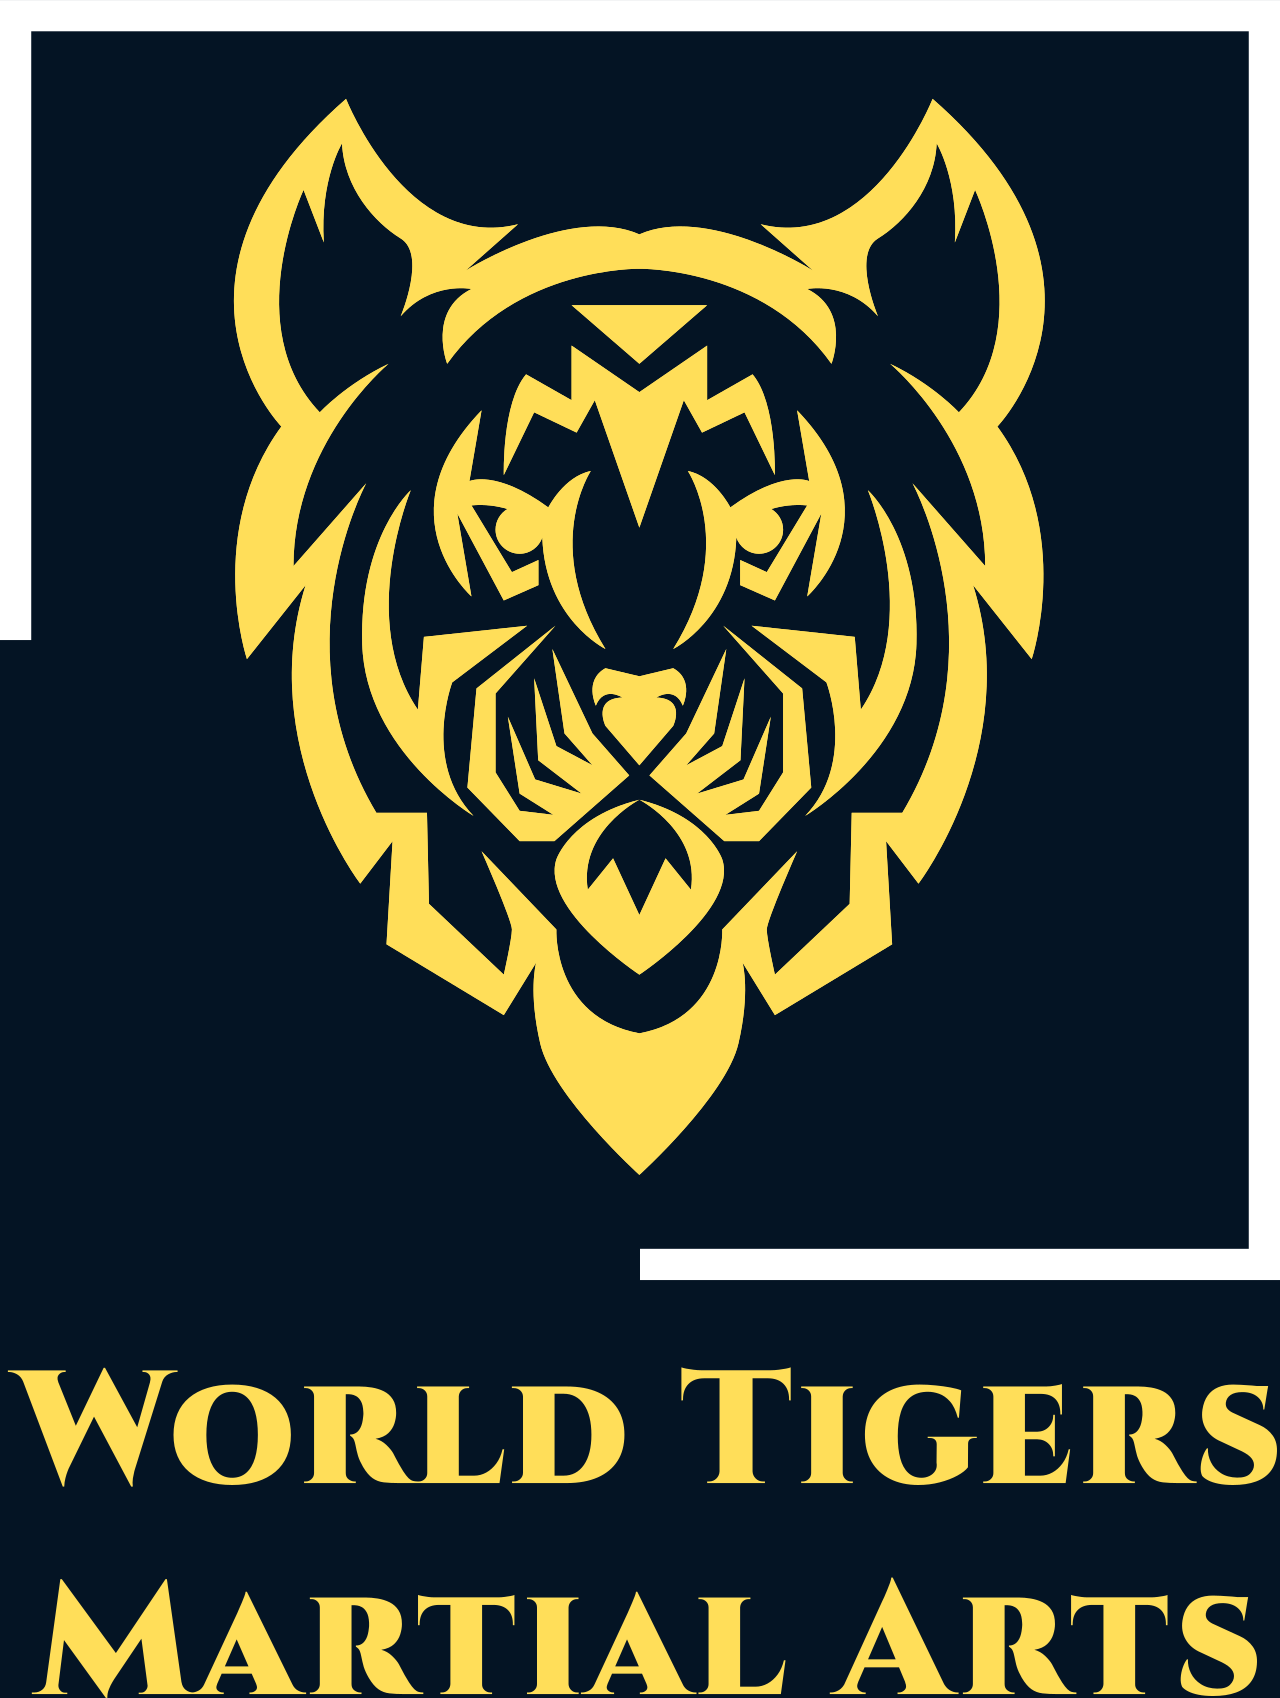 WORLD TIGERS's web page